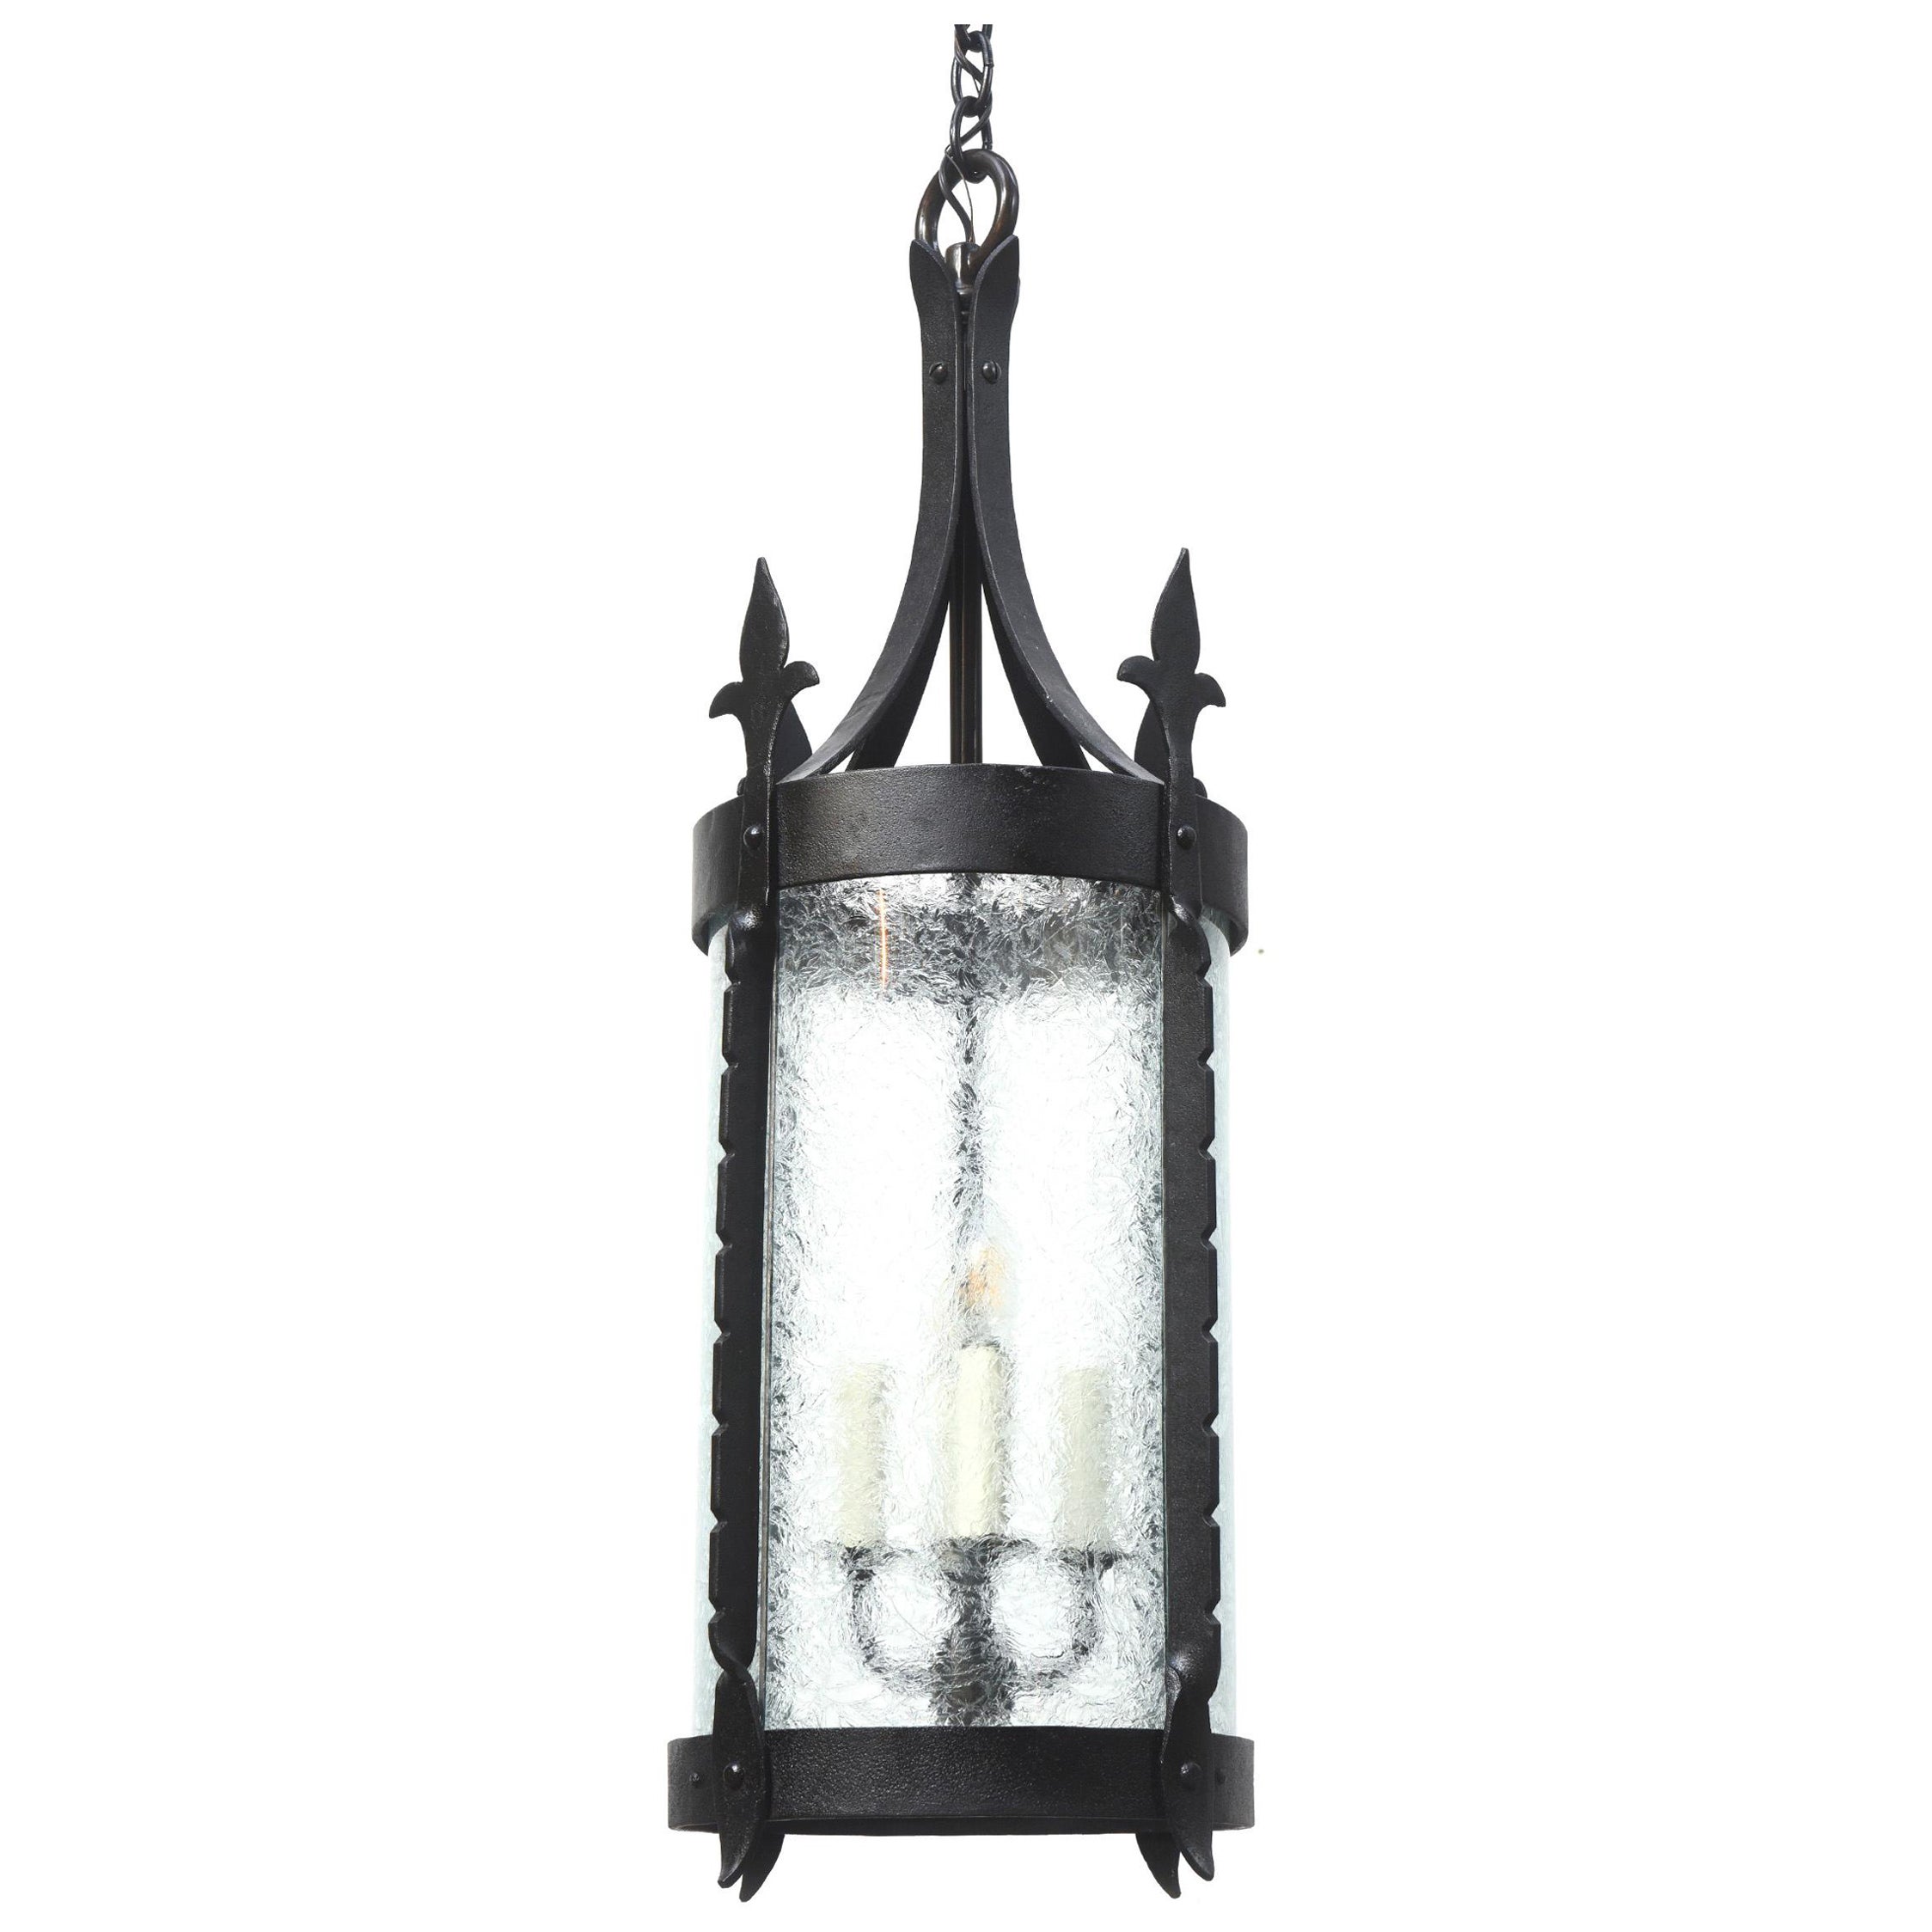 Early 20th Century Wrought Iron Lantern with Curved Textured Glass